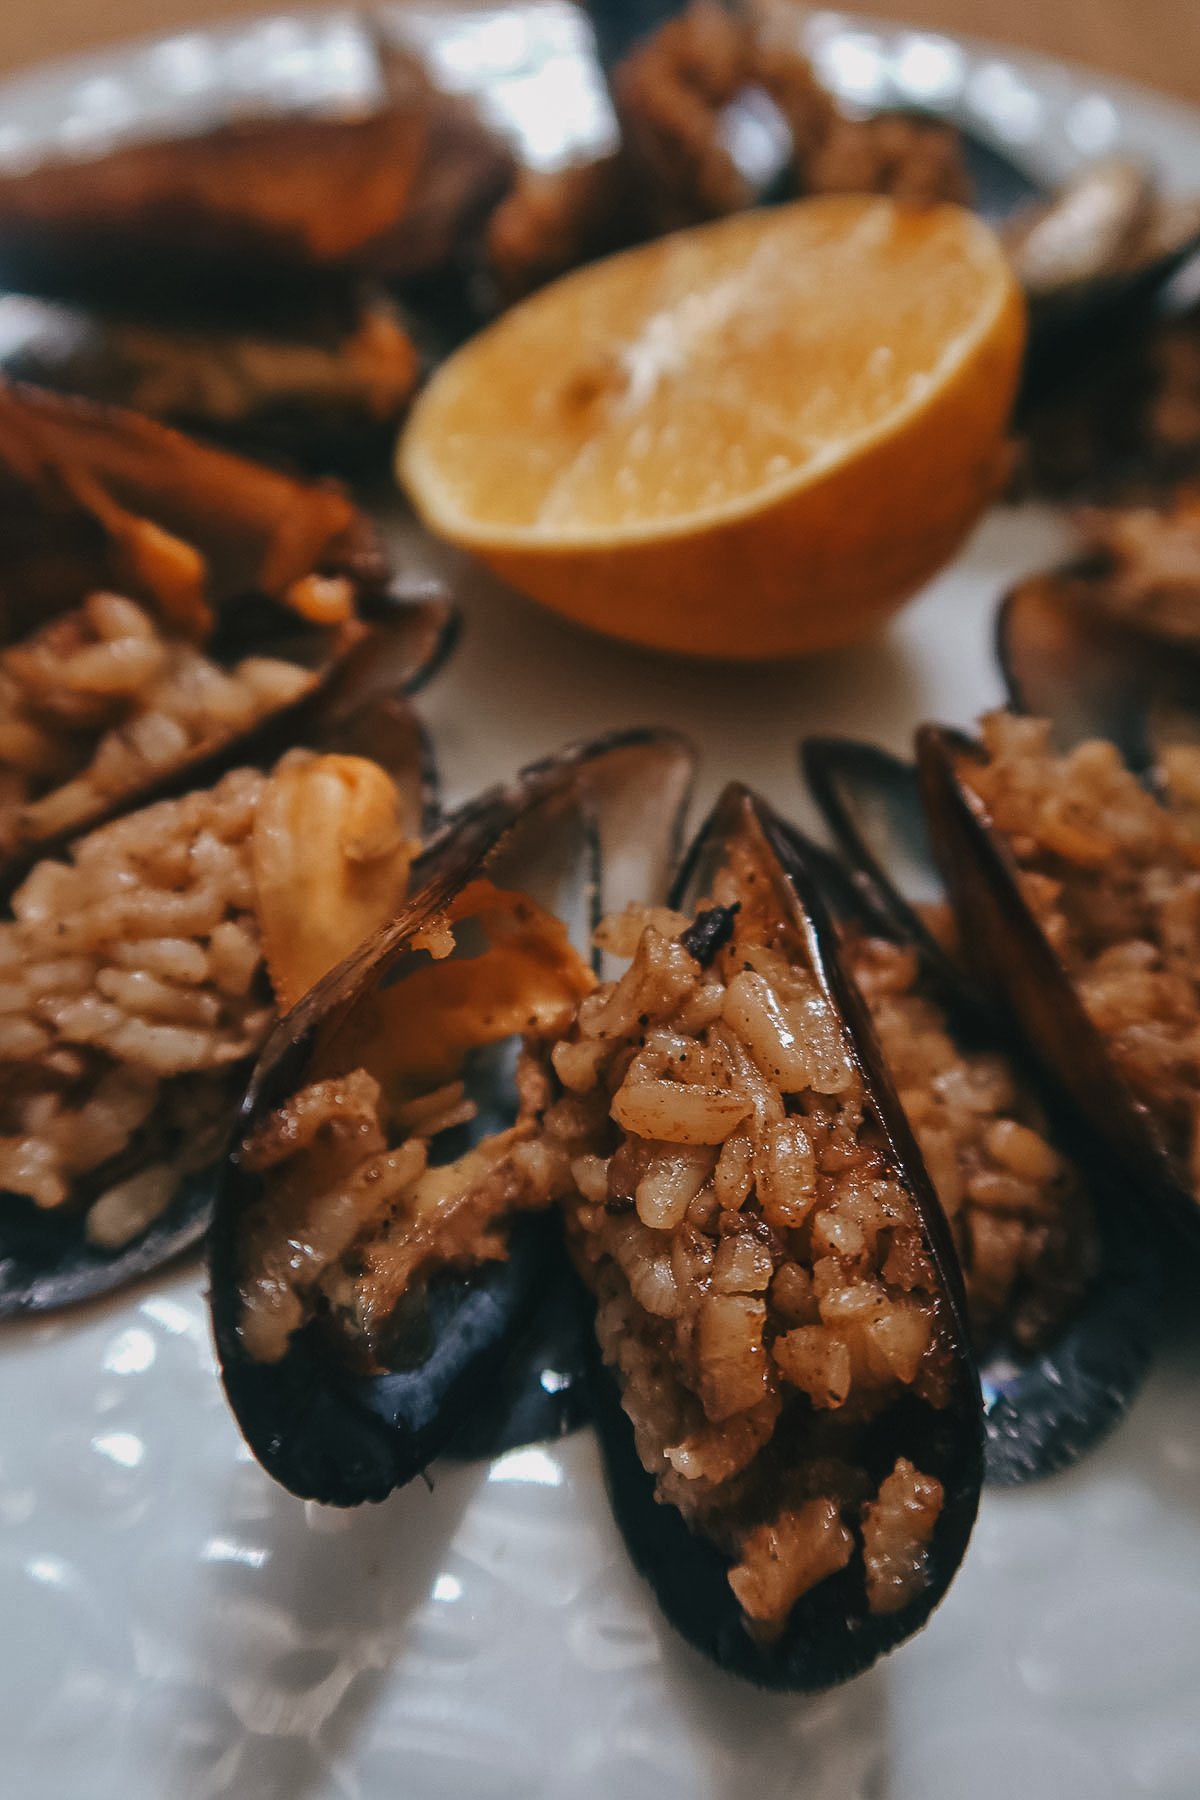 Stuffed mussels at a seafood restaurant in Istanbul